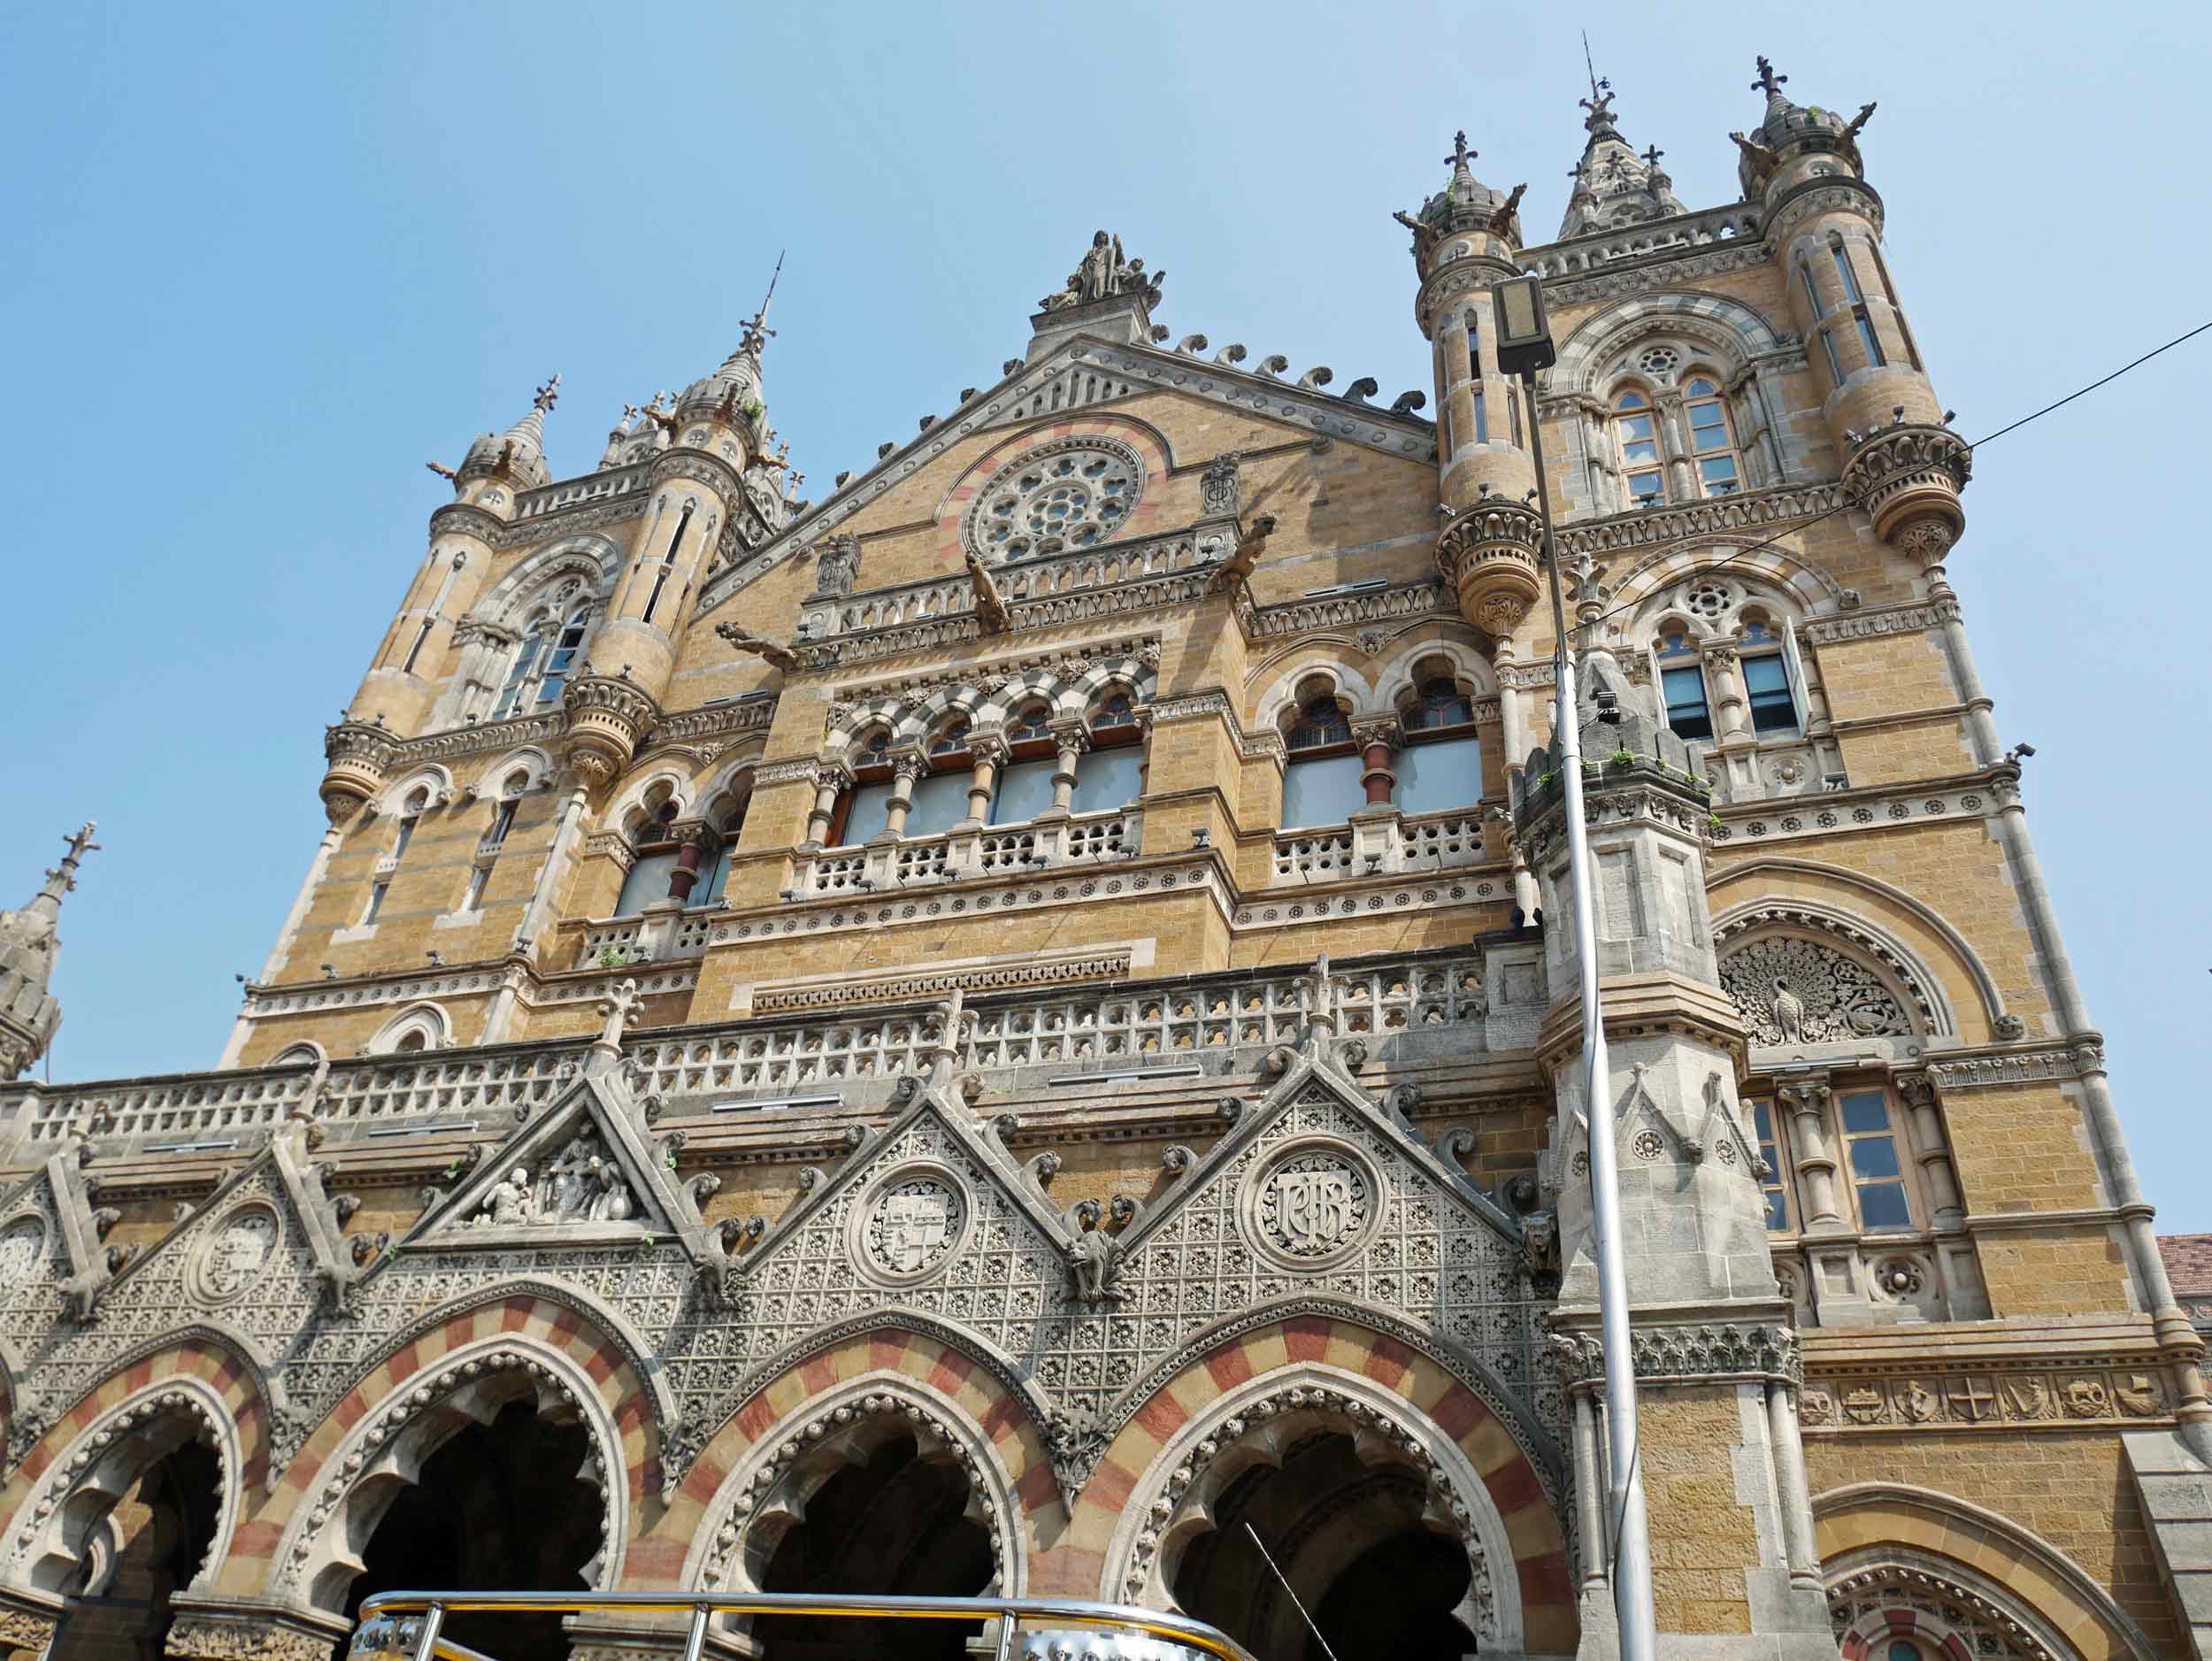  The Chhatrapati Shivaji Maharaj Terminus, previously known as Victoria Terminus, was built in the late 1800s in Indian Goth style and still houses the central railway.&nbsp;&nbsp; 